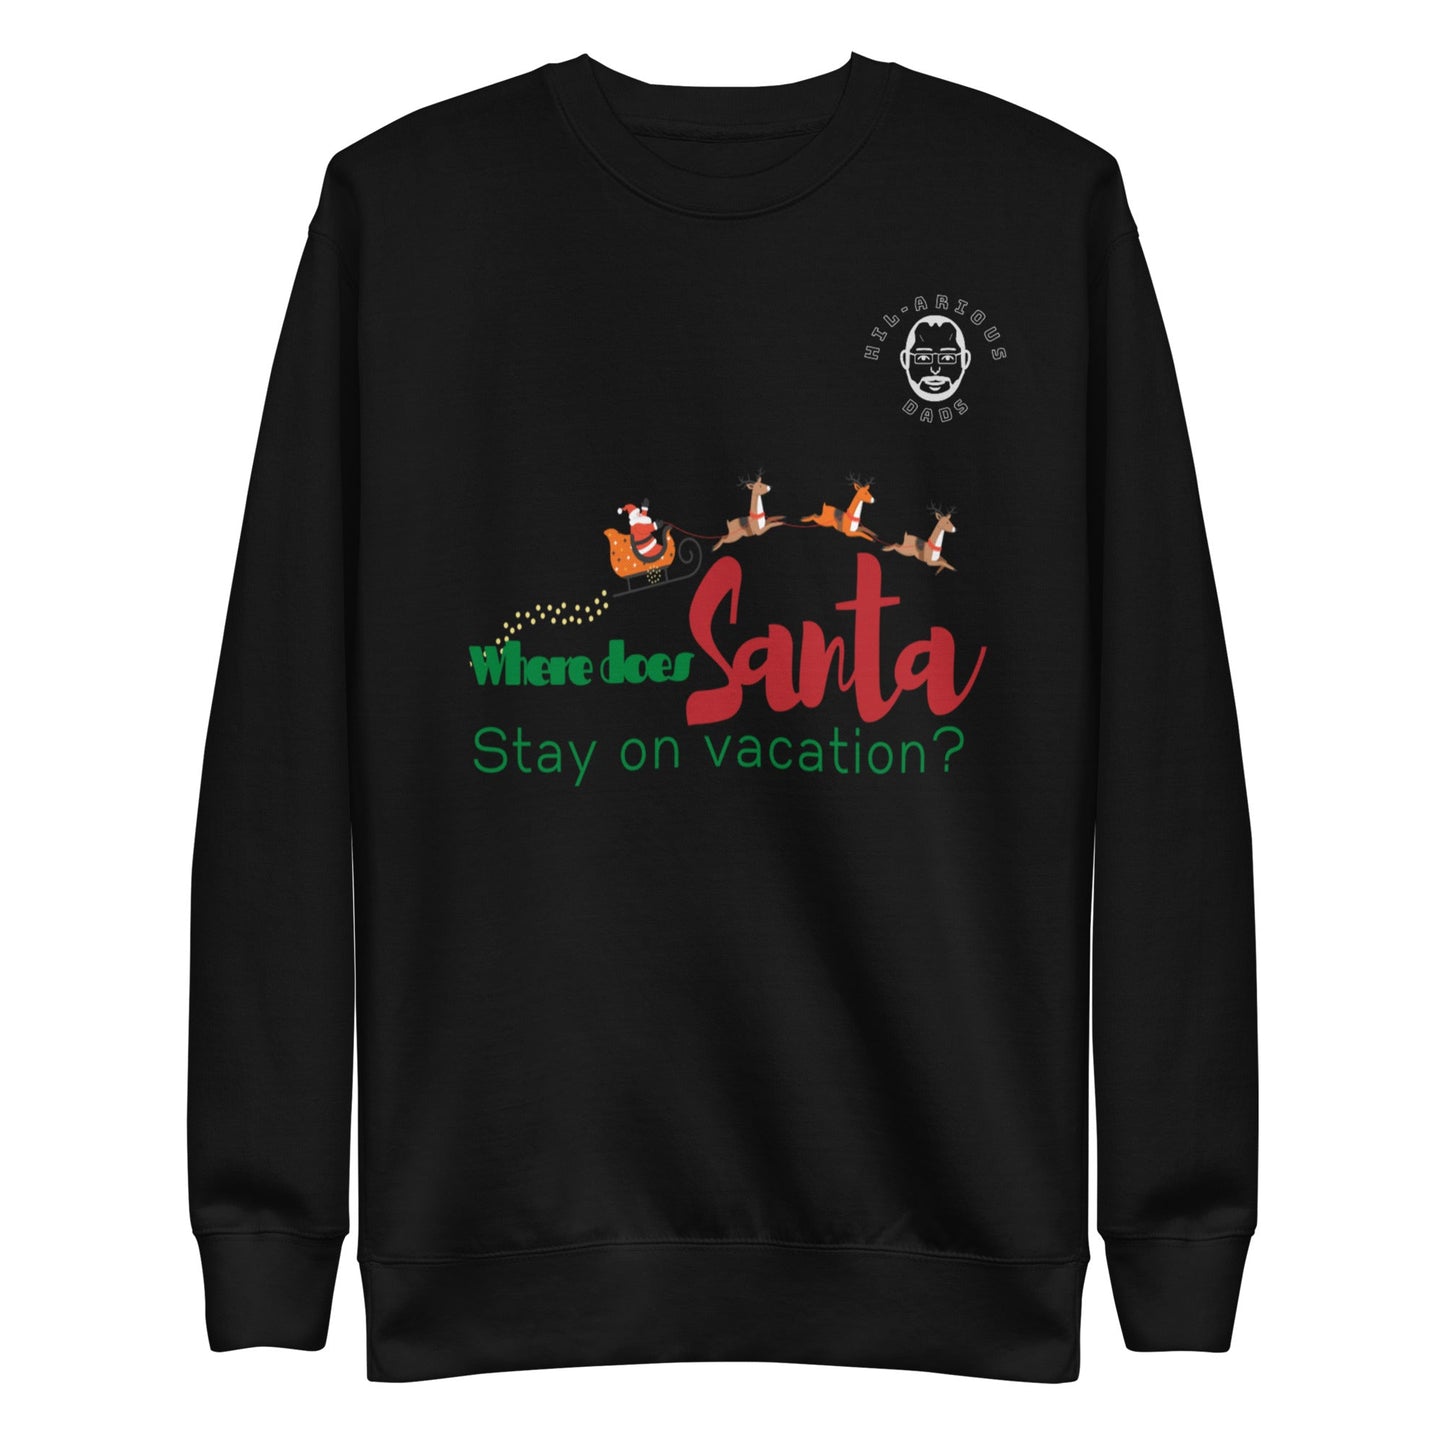 Where does Santa stay on vacation?-Sweatshirt - Hil-arious Dads